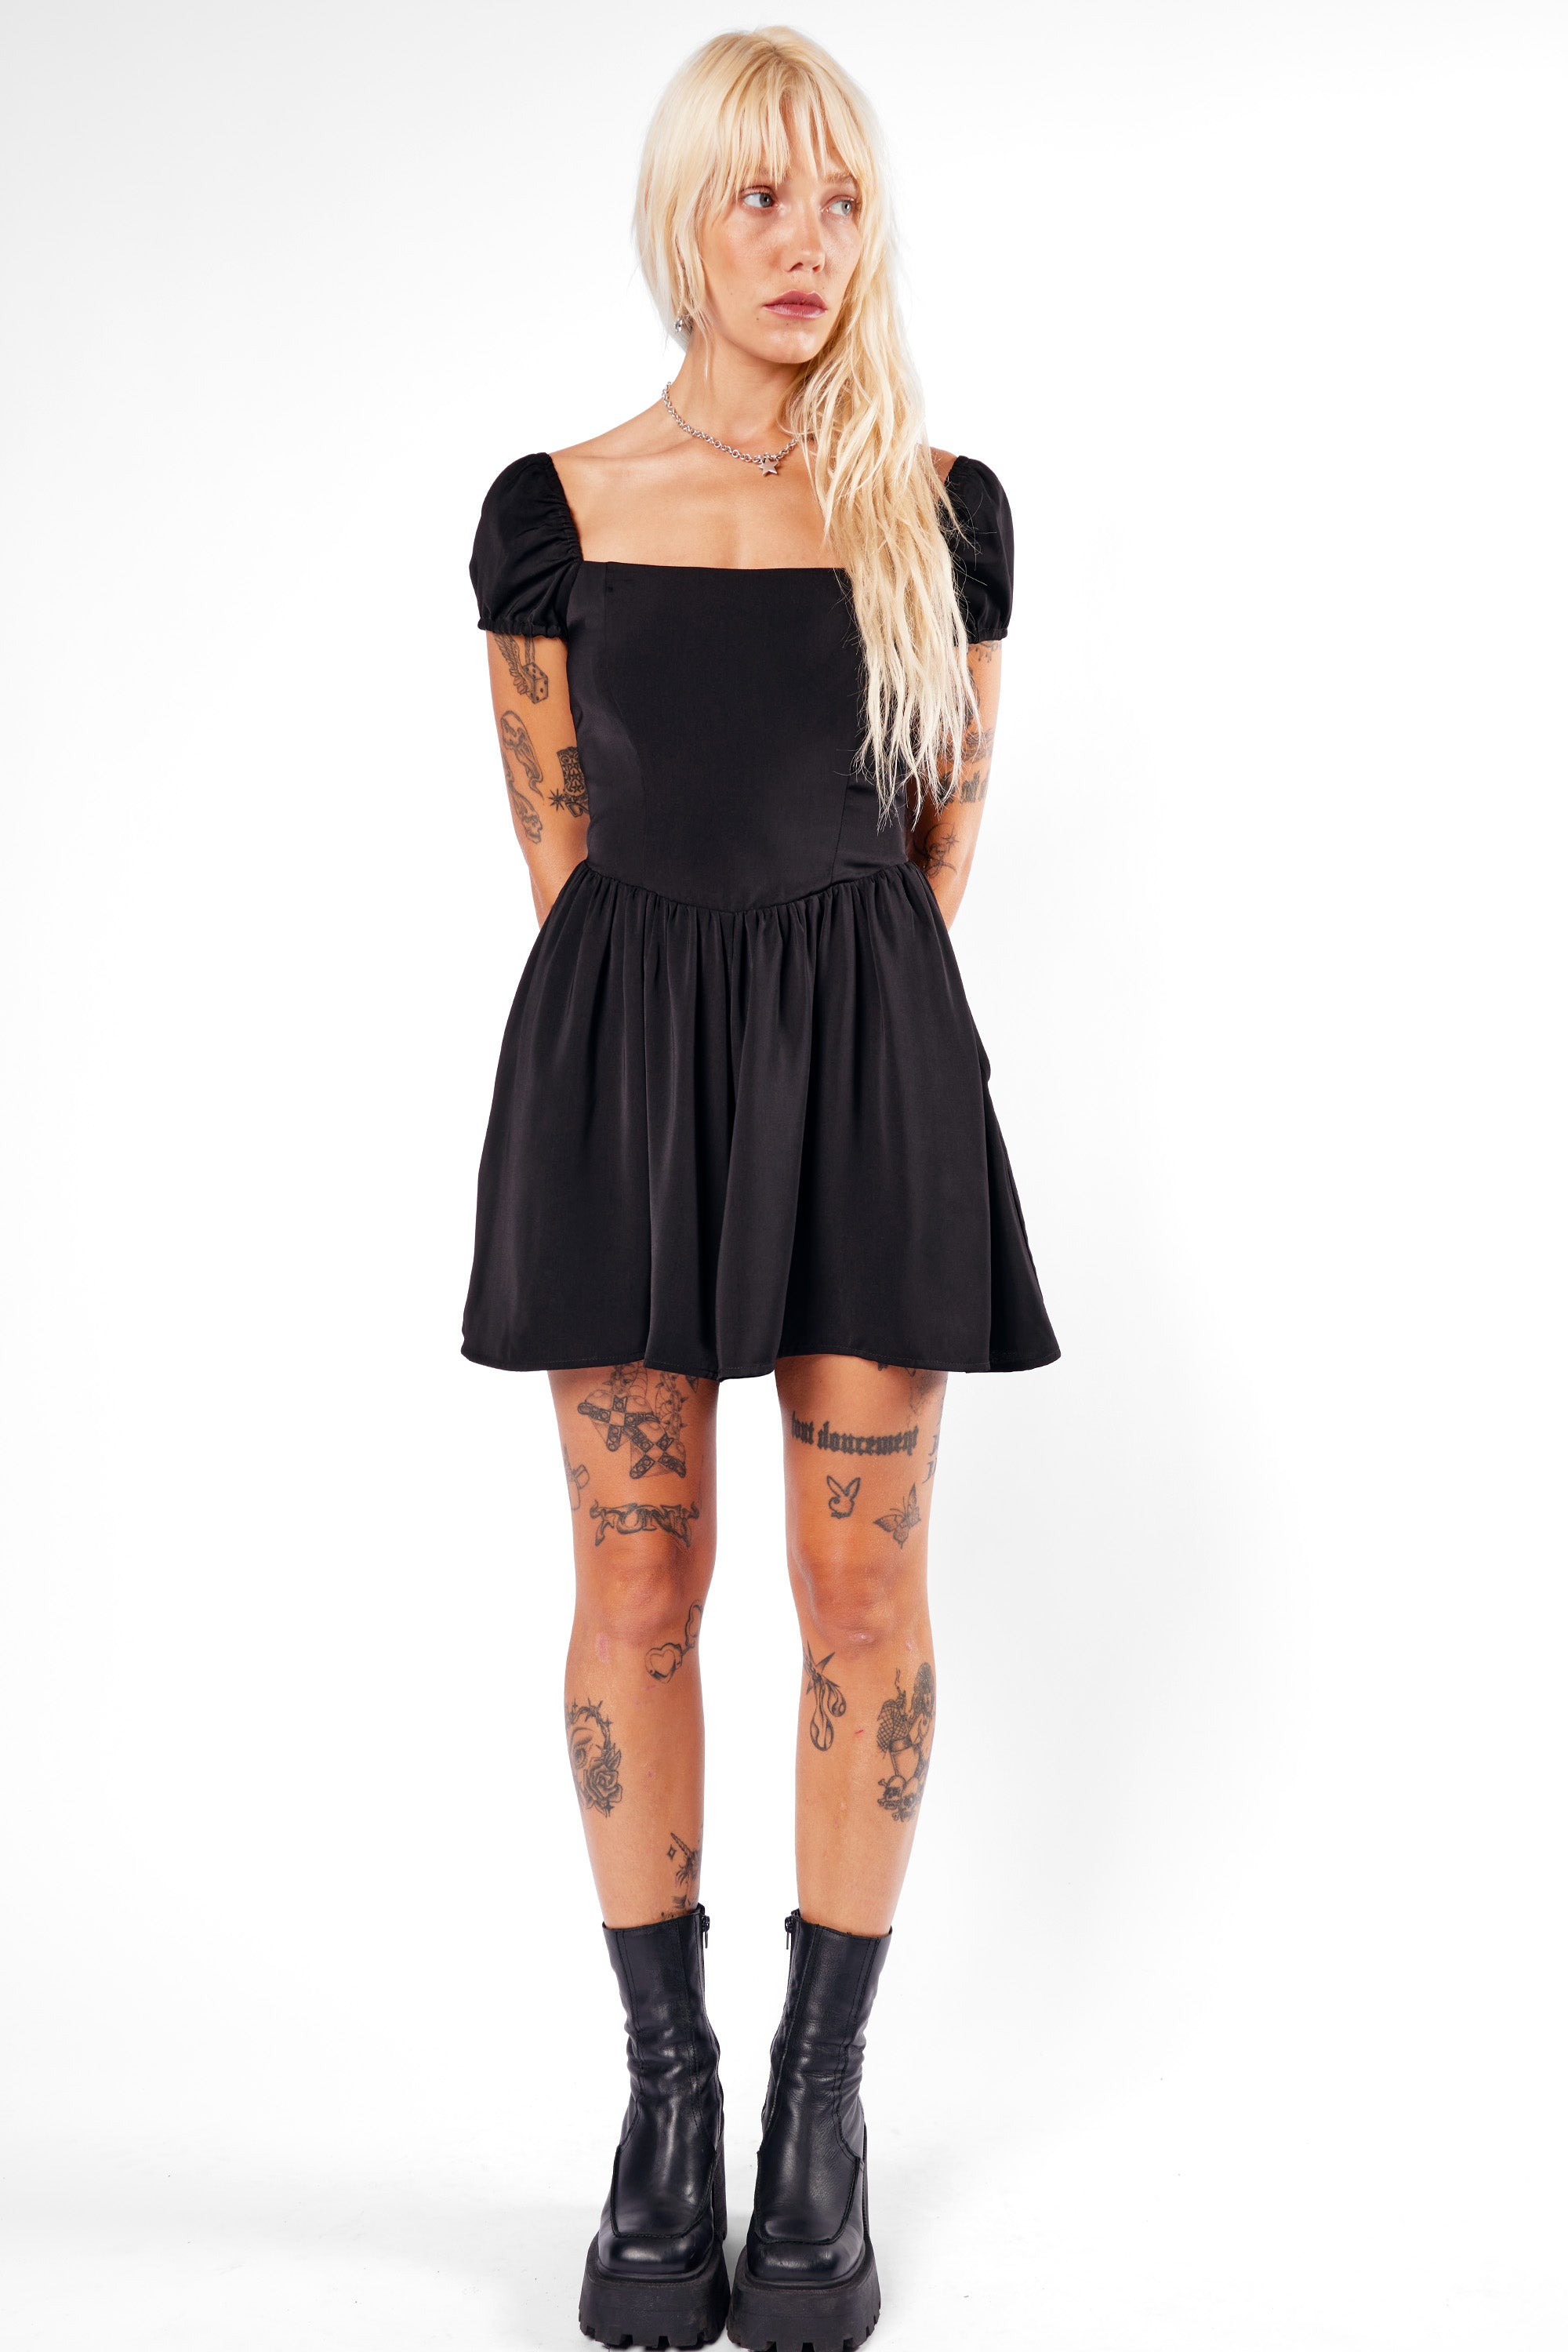 Nevermore Lace-Up Playsuit - Mary Wyatt London